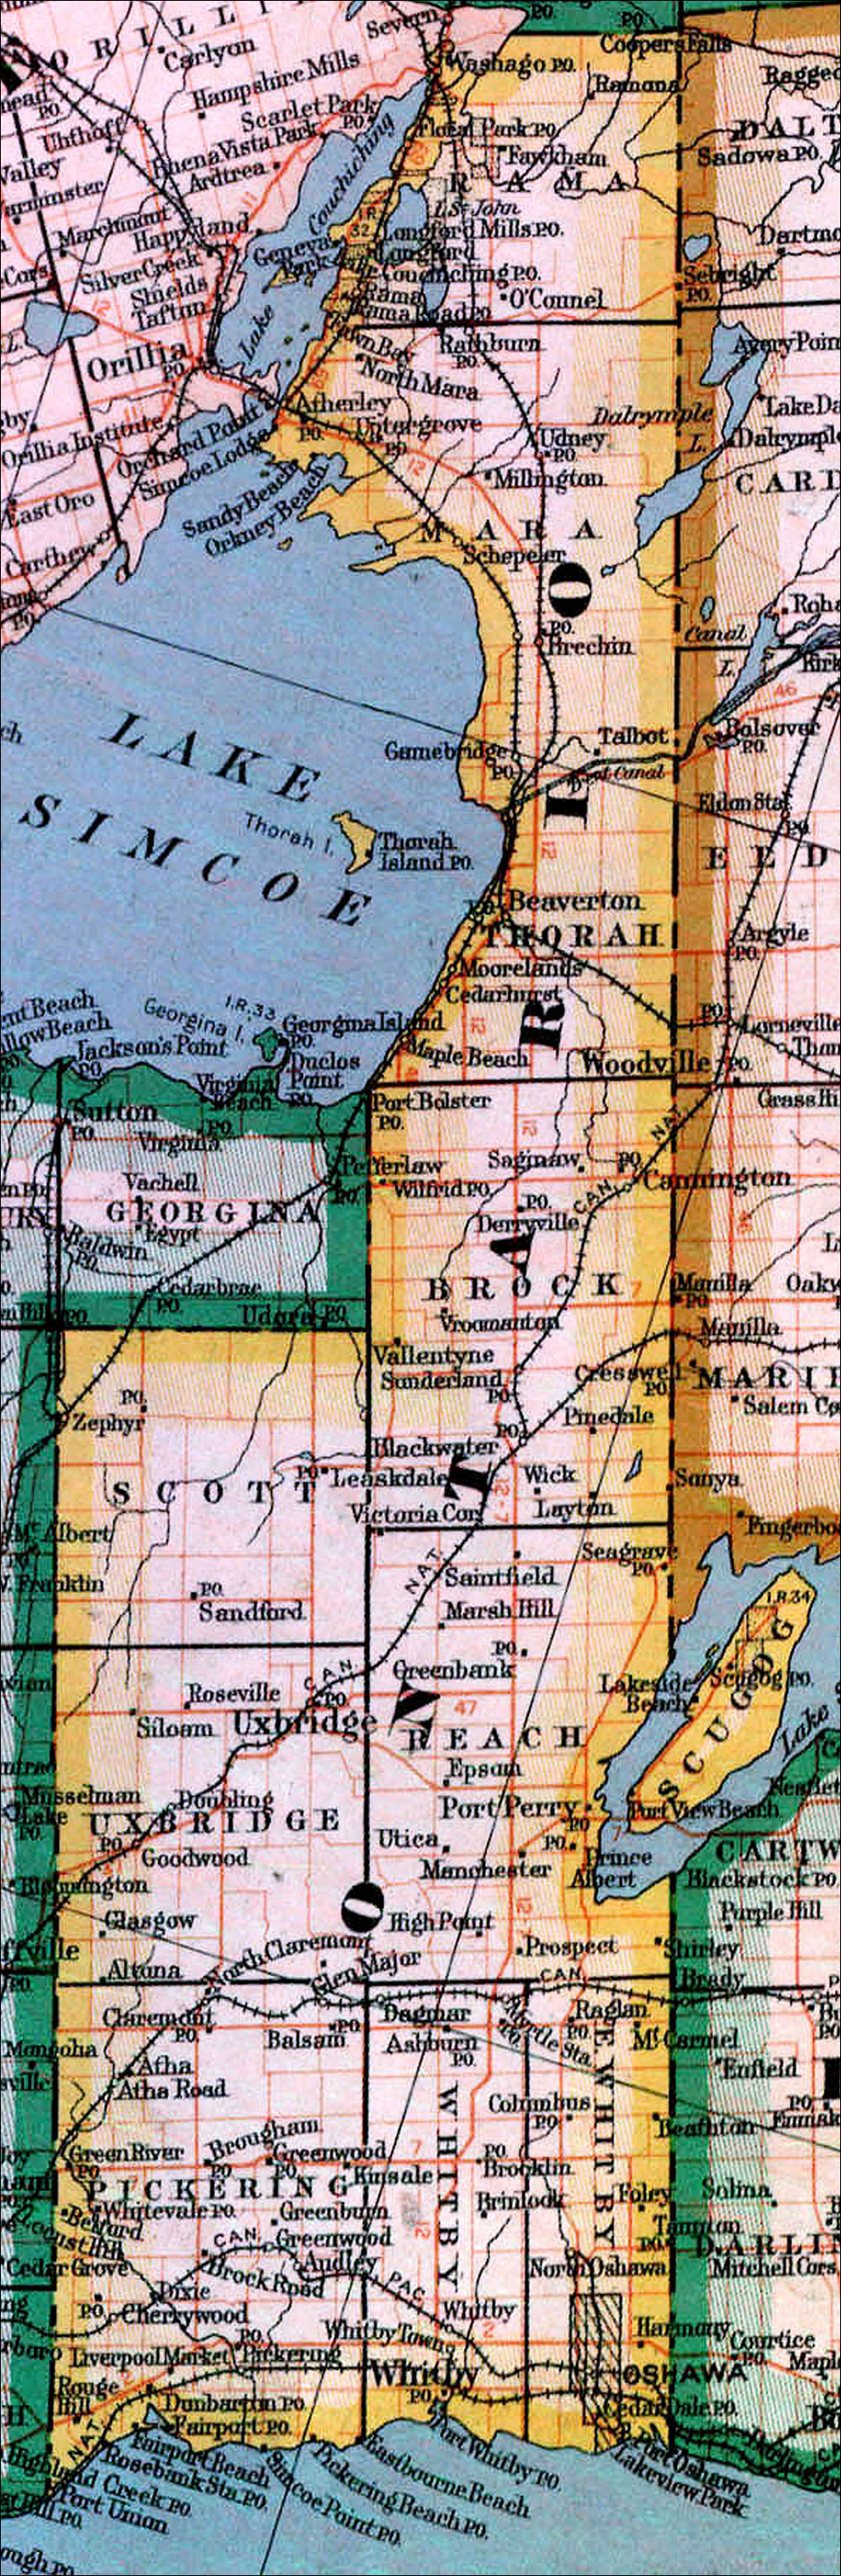 Large scale map of County of Ontario